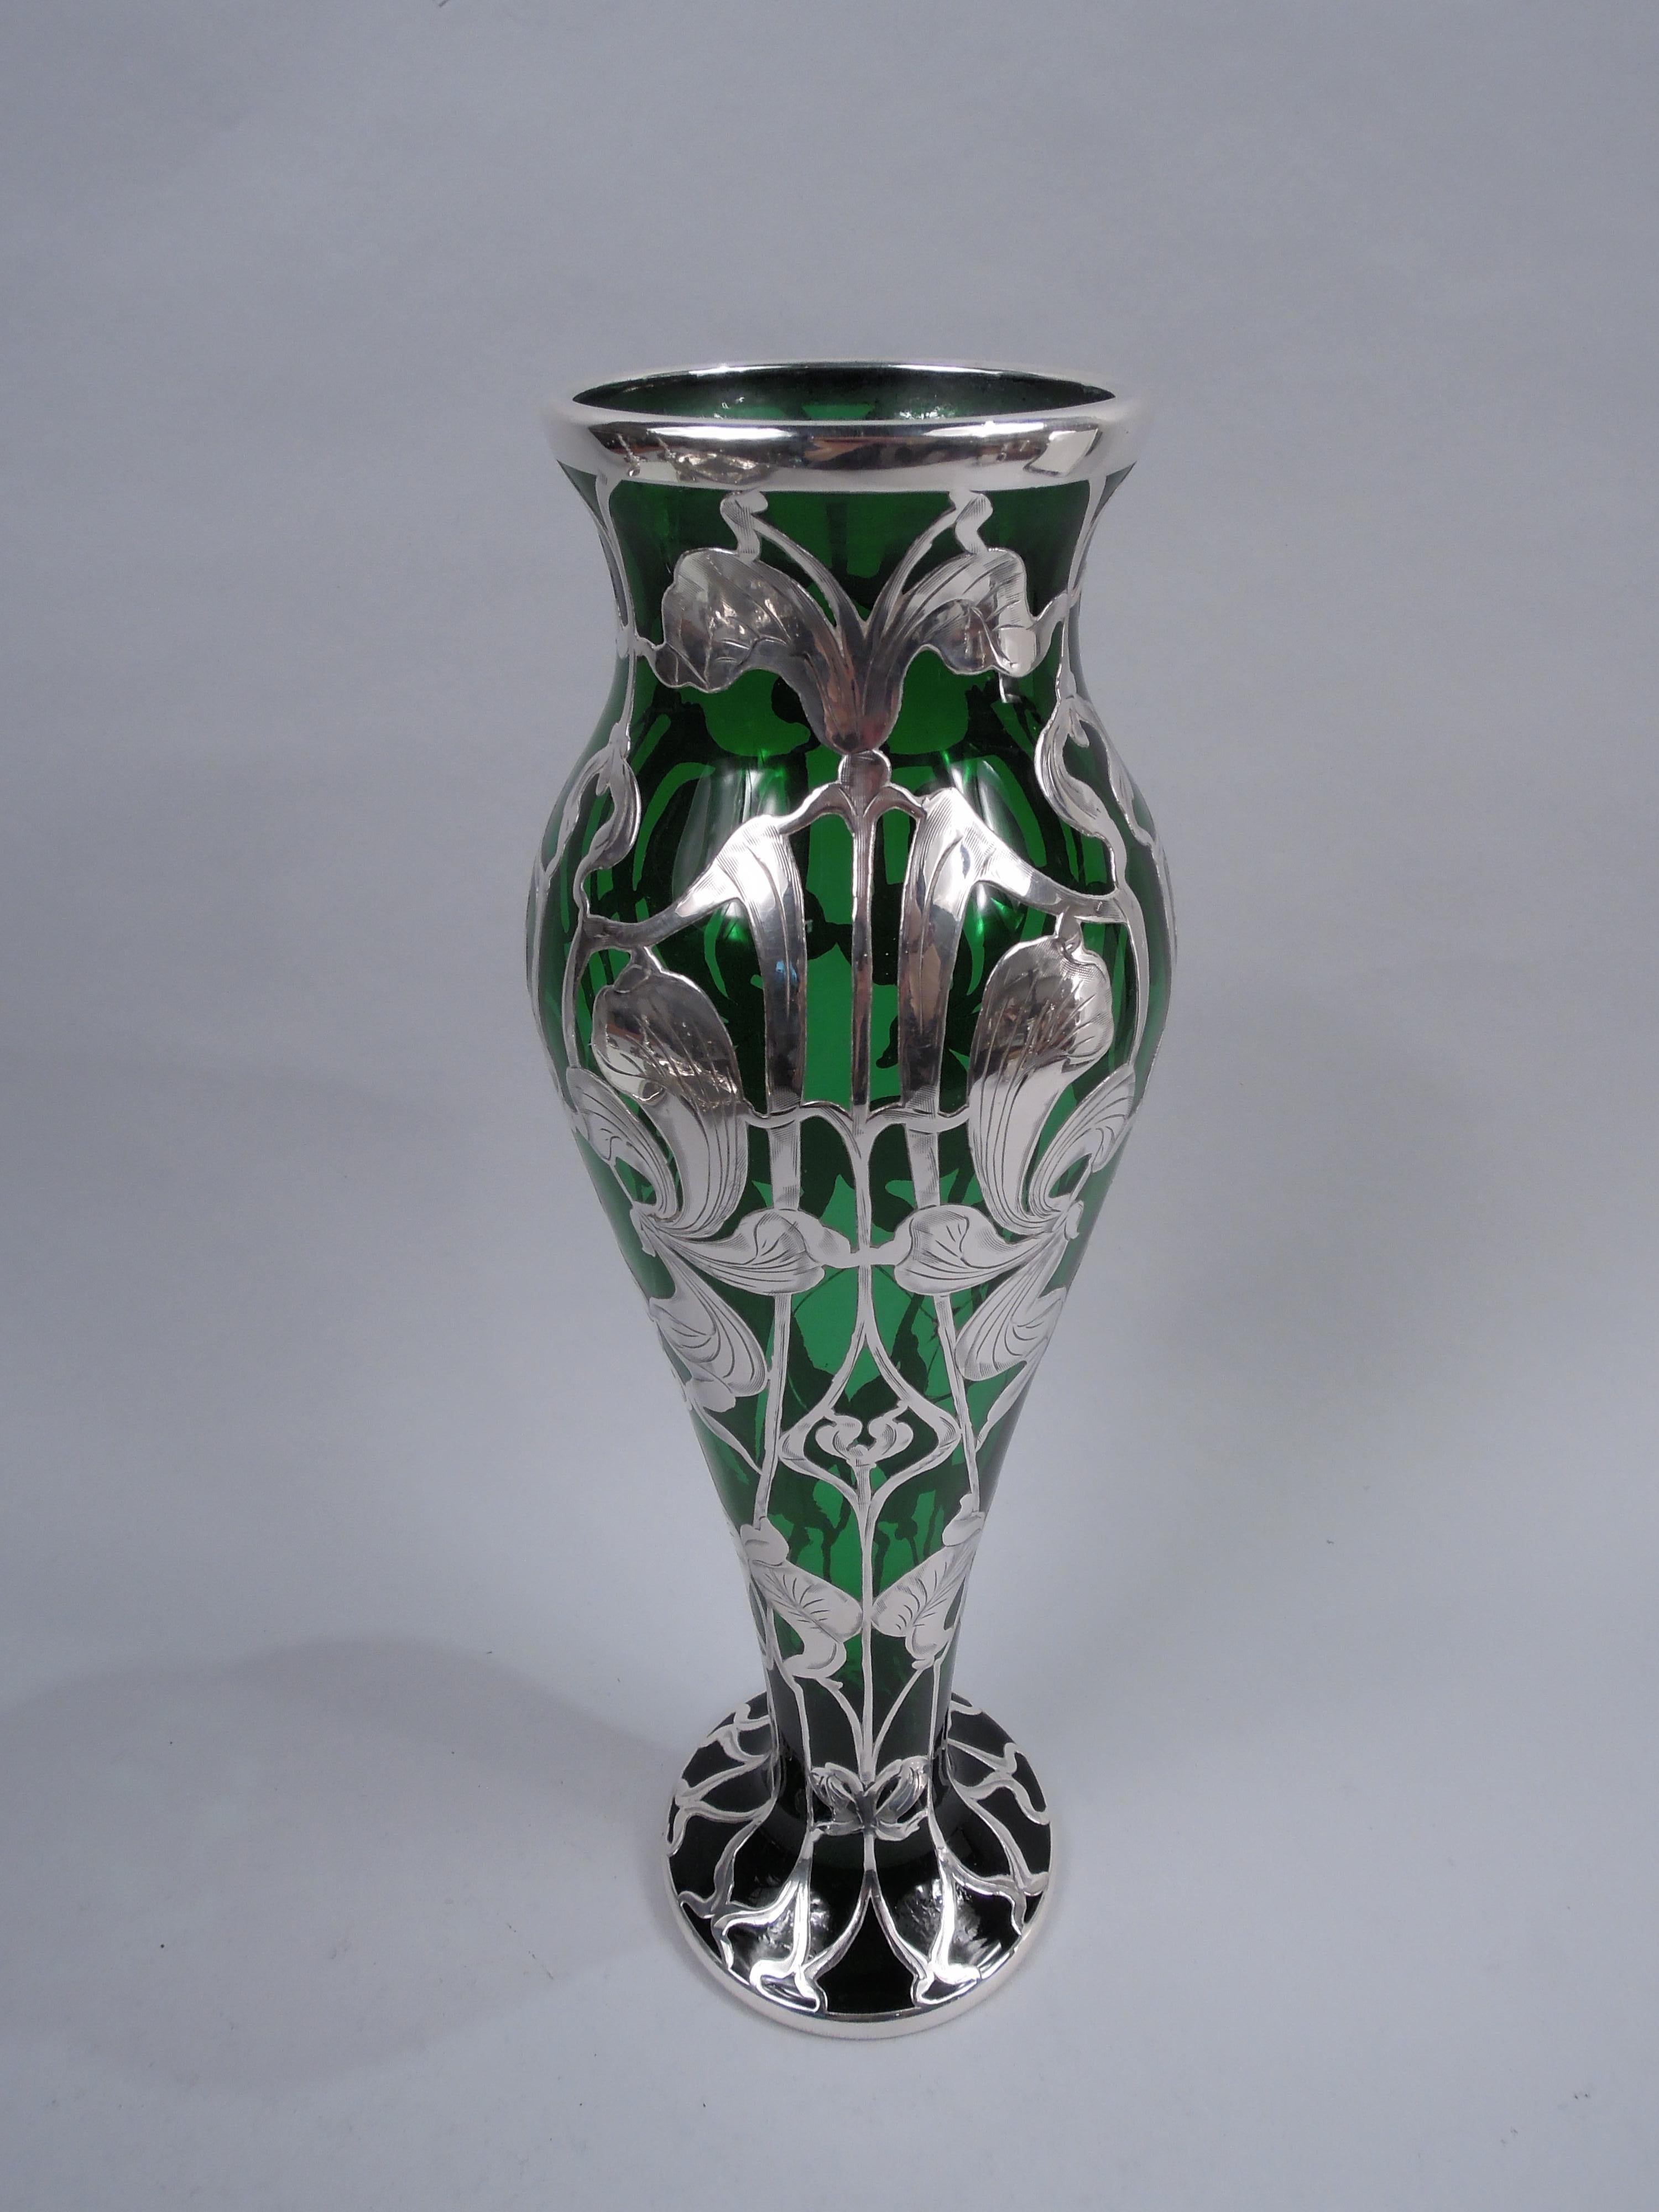 American Art Nouveau glass vase with engraved silver overlay, ca 1900. Baluster with inset and flared rim and spread foot. Vertical overlay pattern comprising distended flower heads and leaves overlapping curvilinear tendrils. Heart-shaped cartouche